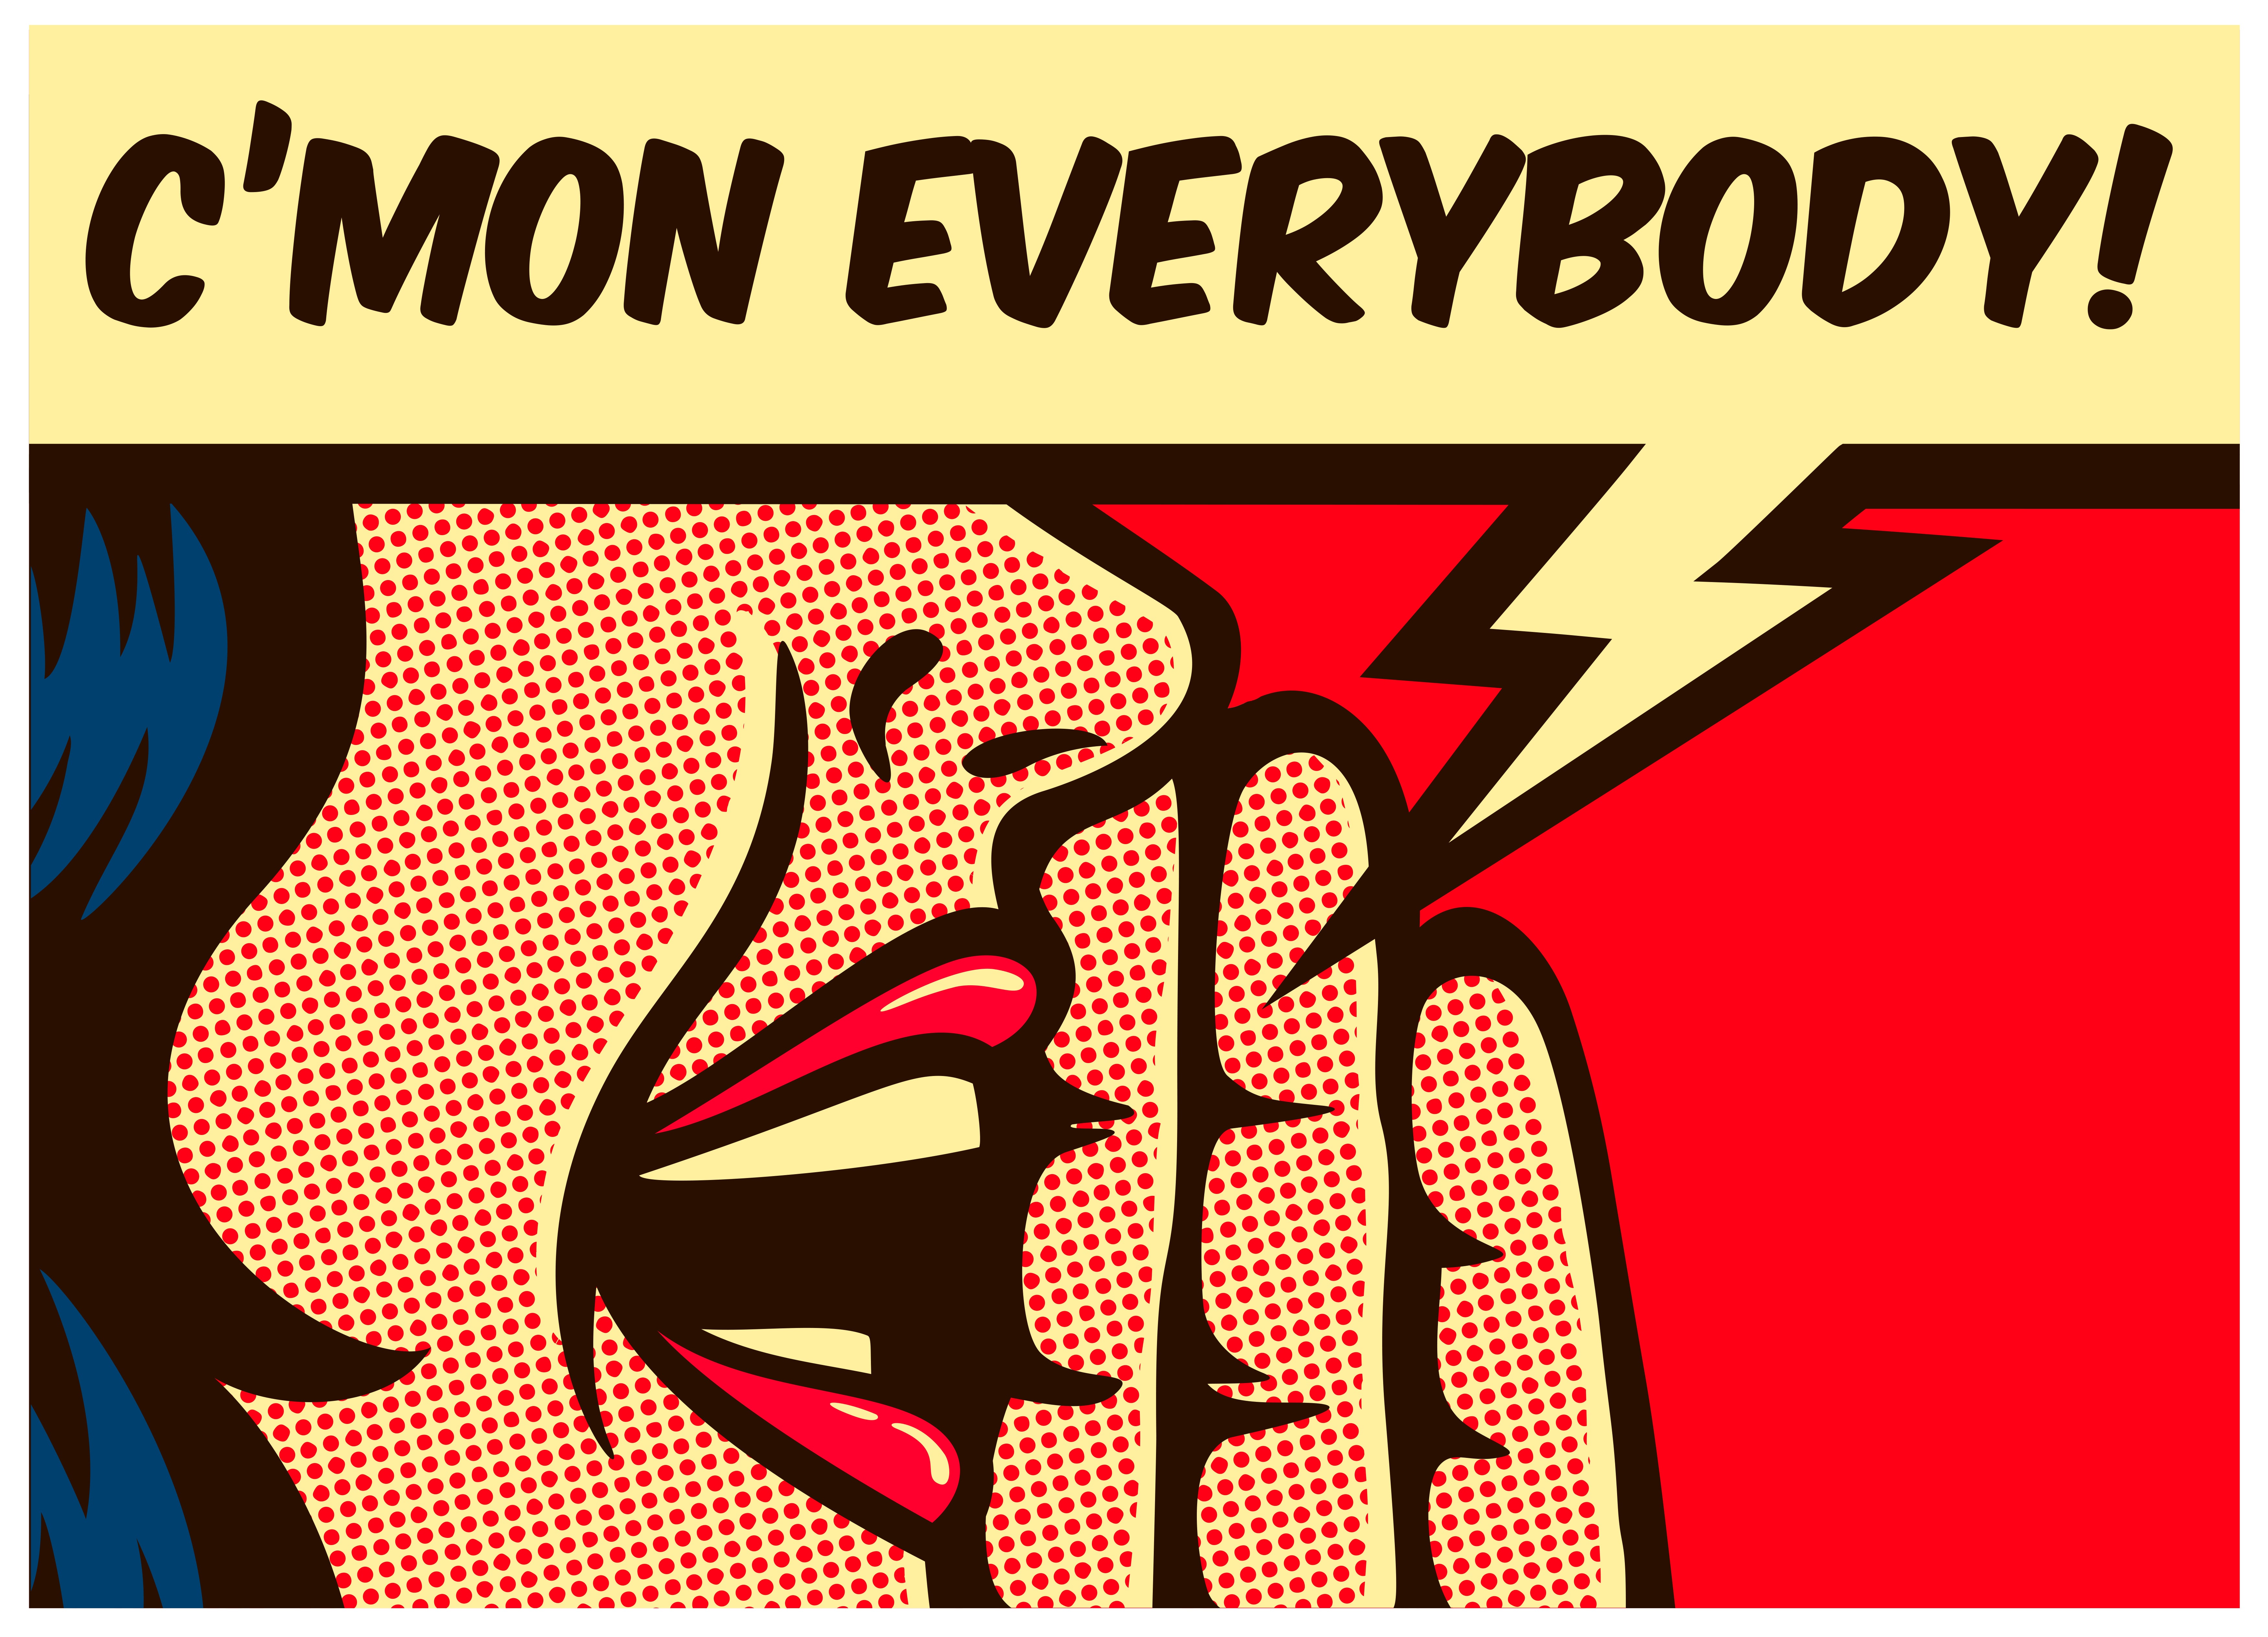 comic-book style illustration of person calling out "c'mon everybody!"